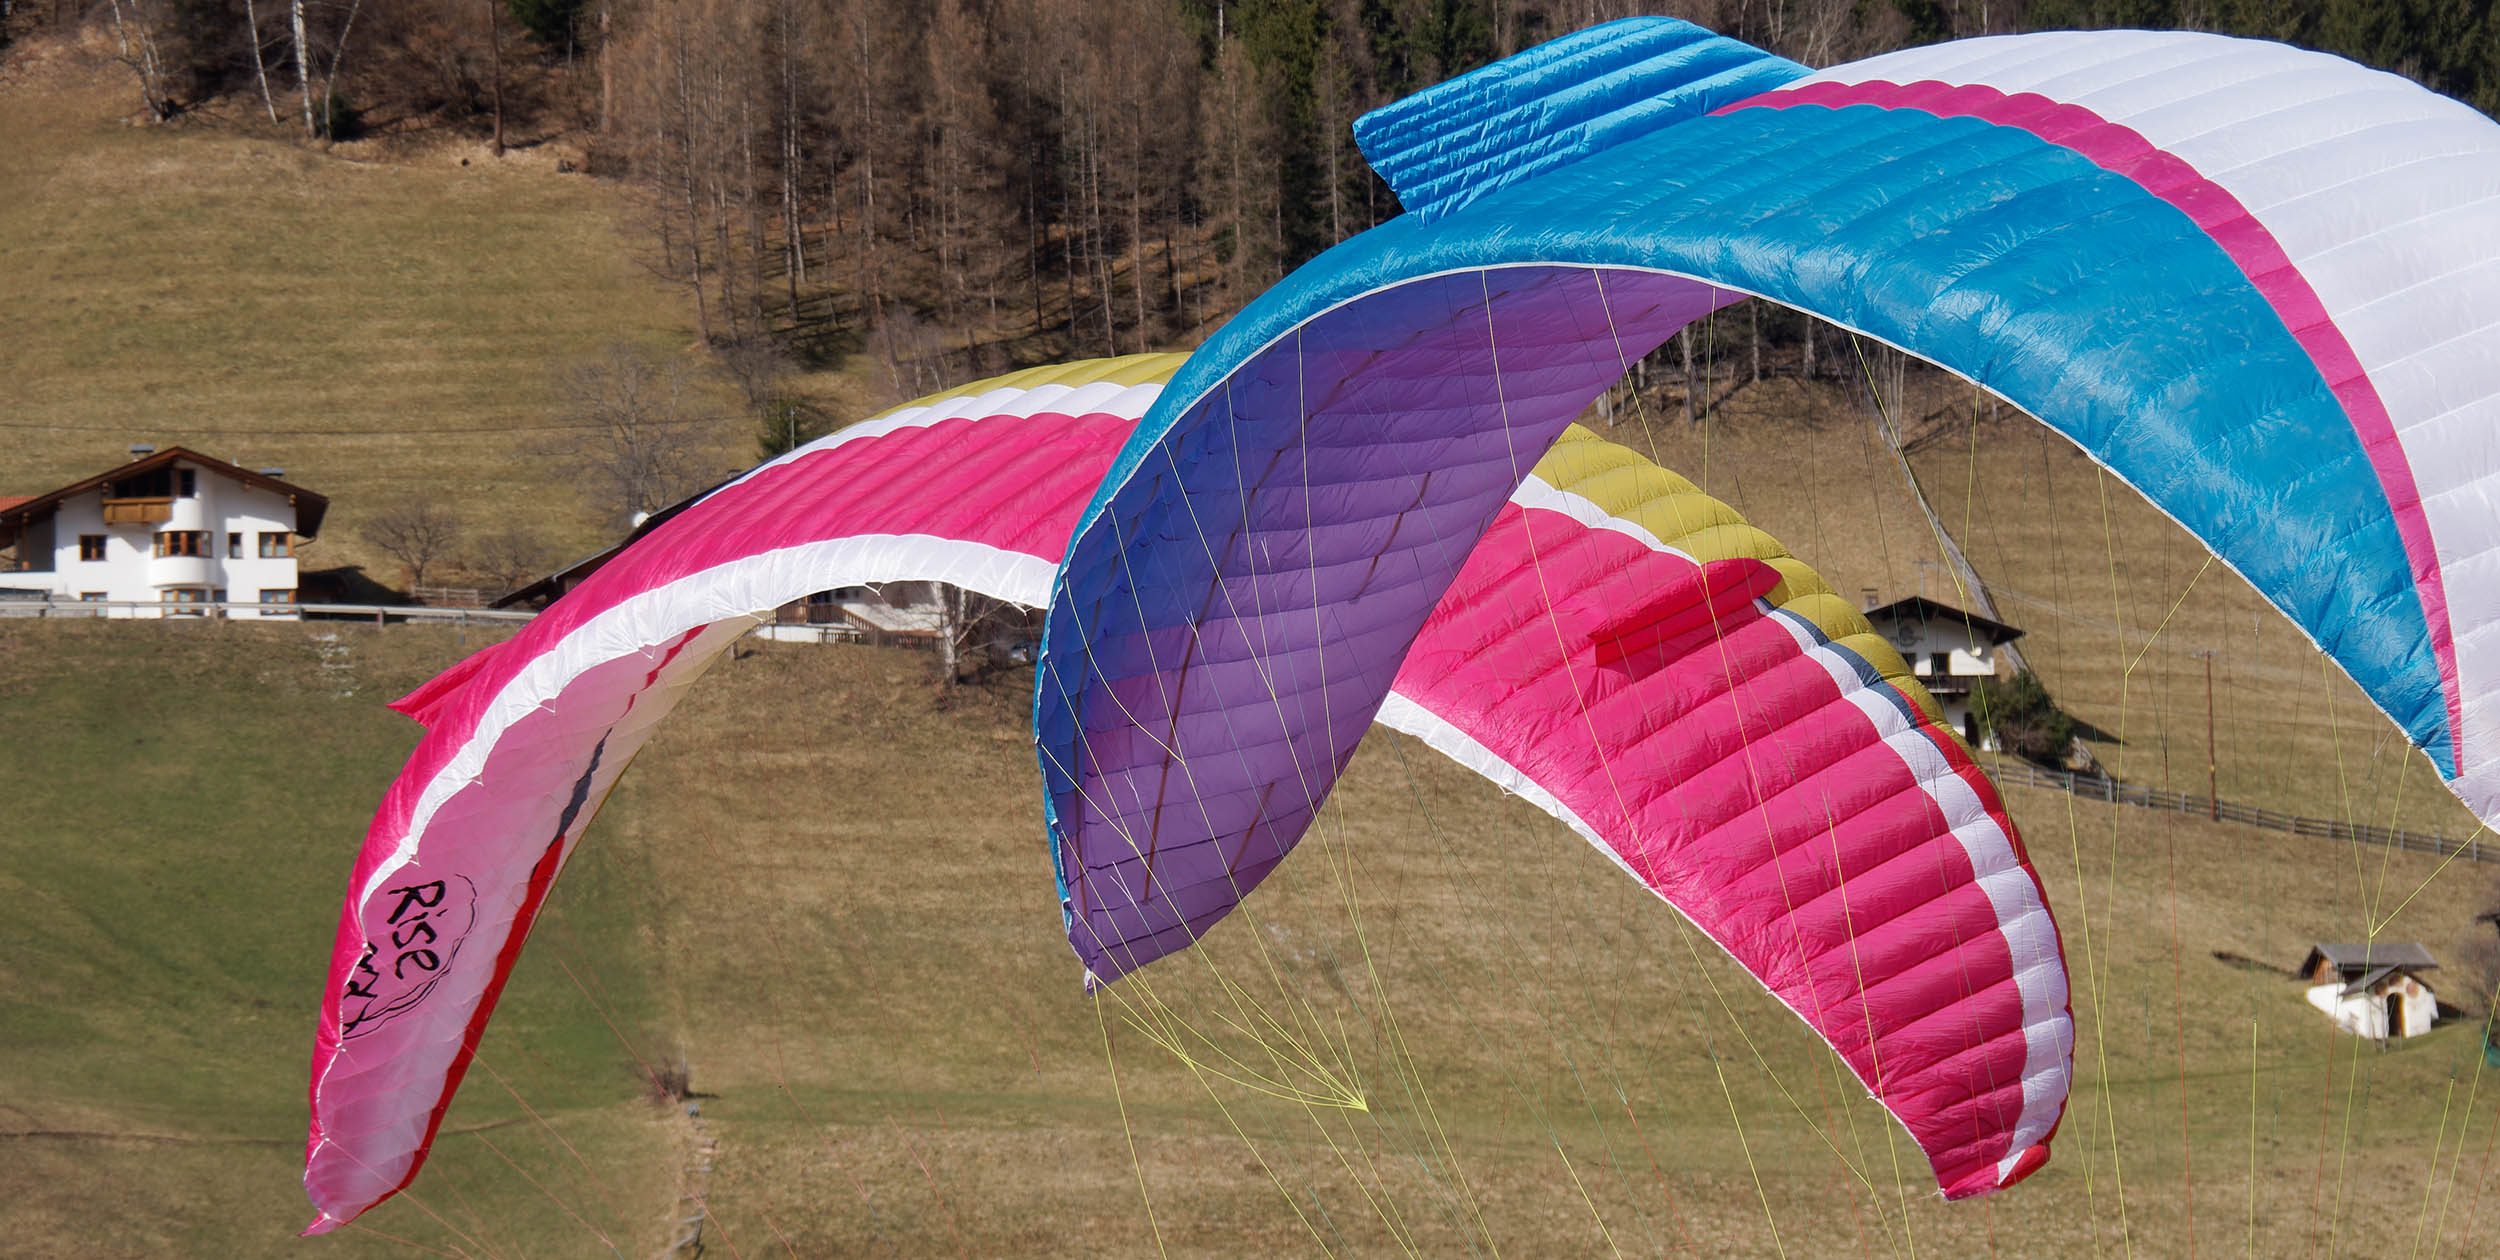 Winglets-on-Paragliders-2500-Erwin-Voogt